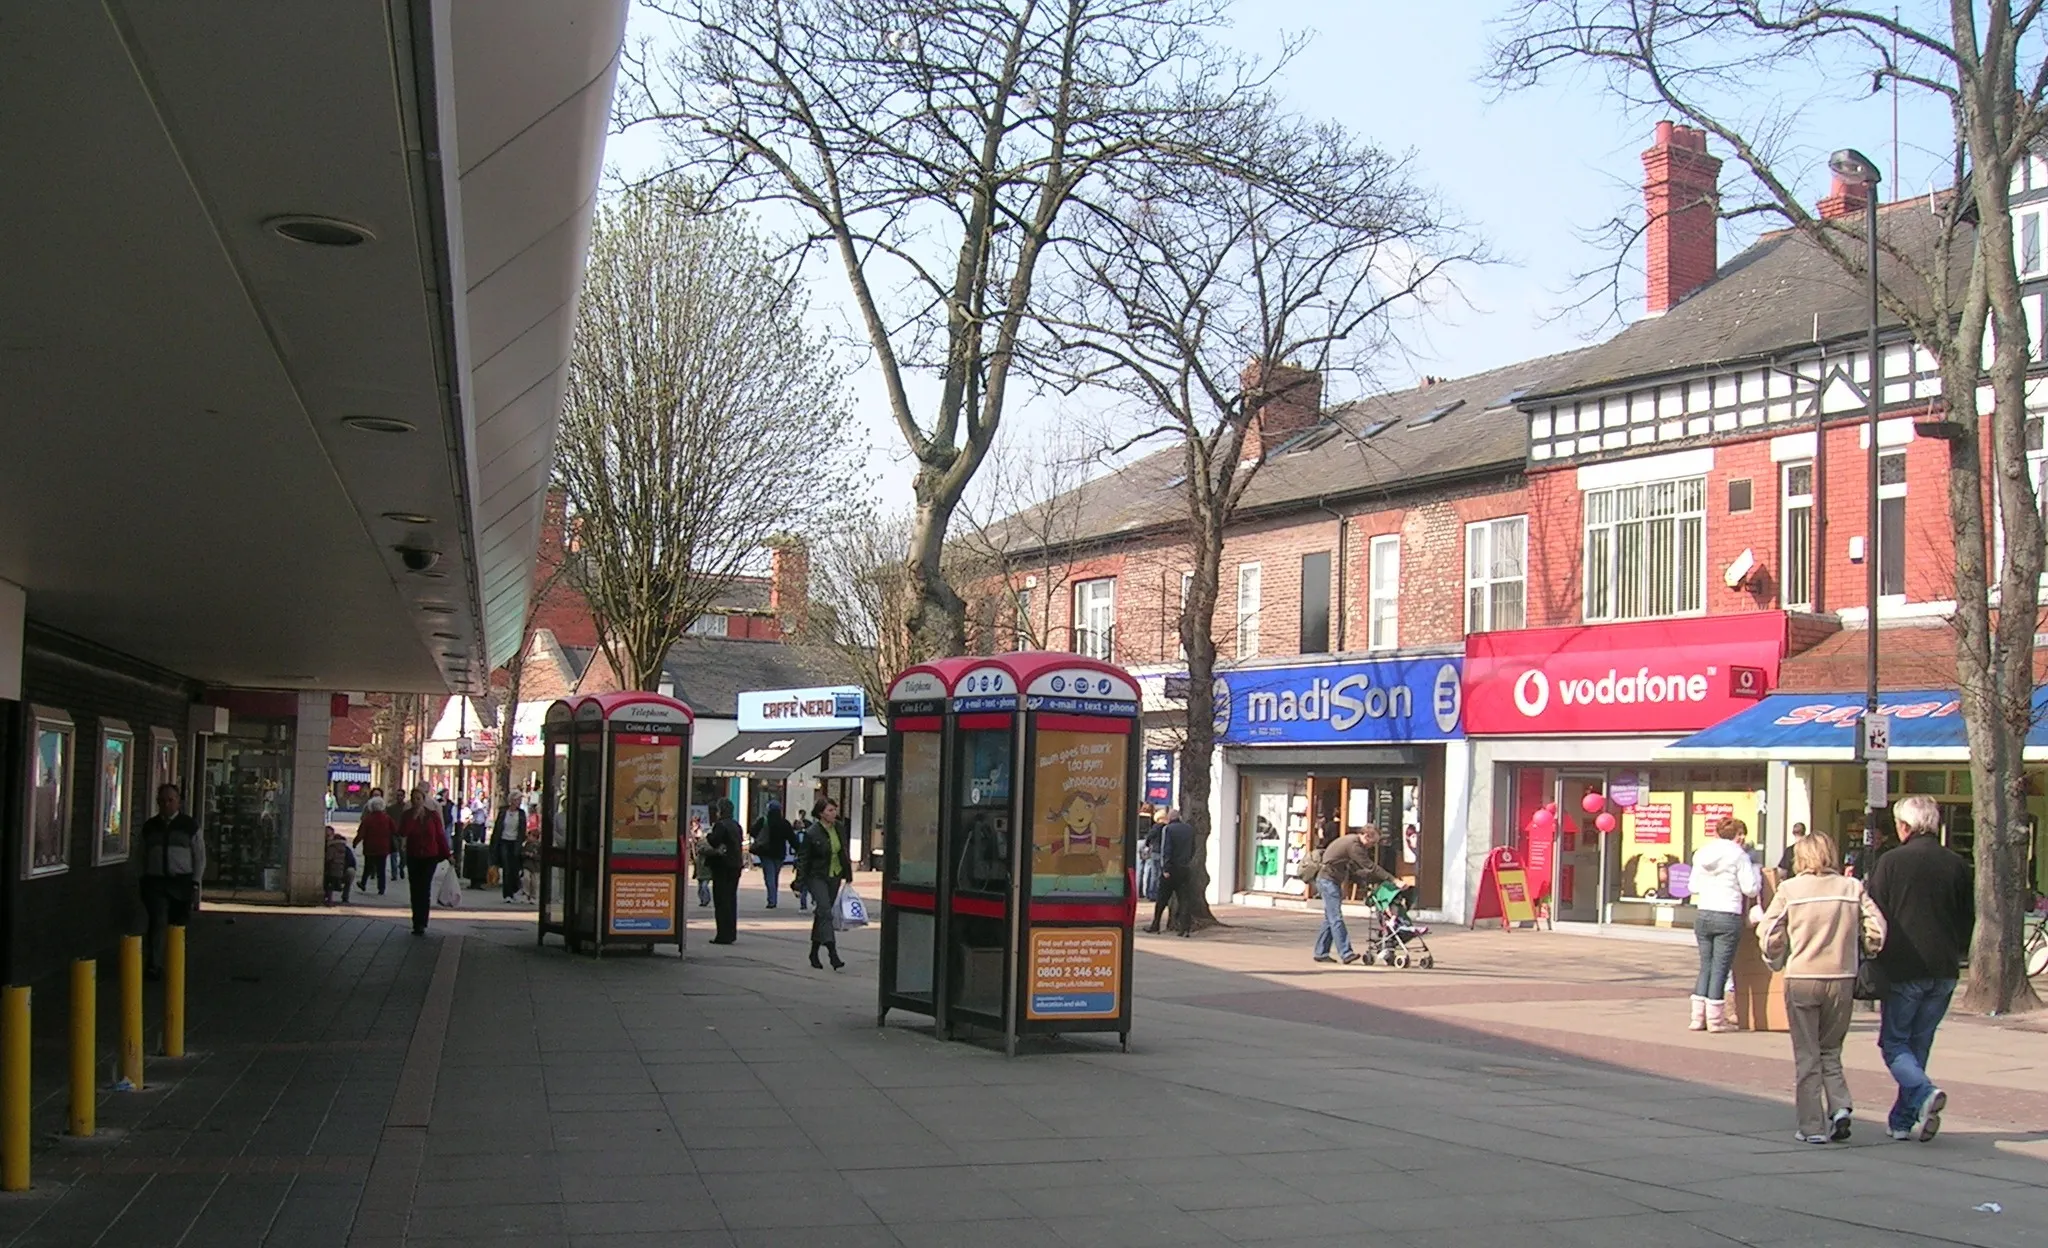 Photo showing: Sale shopping centre